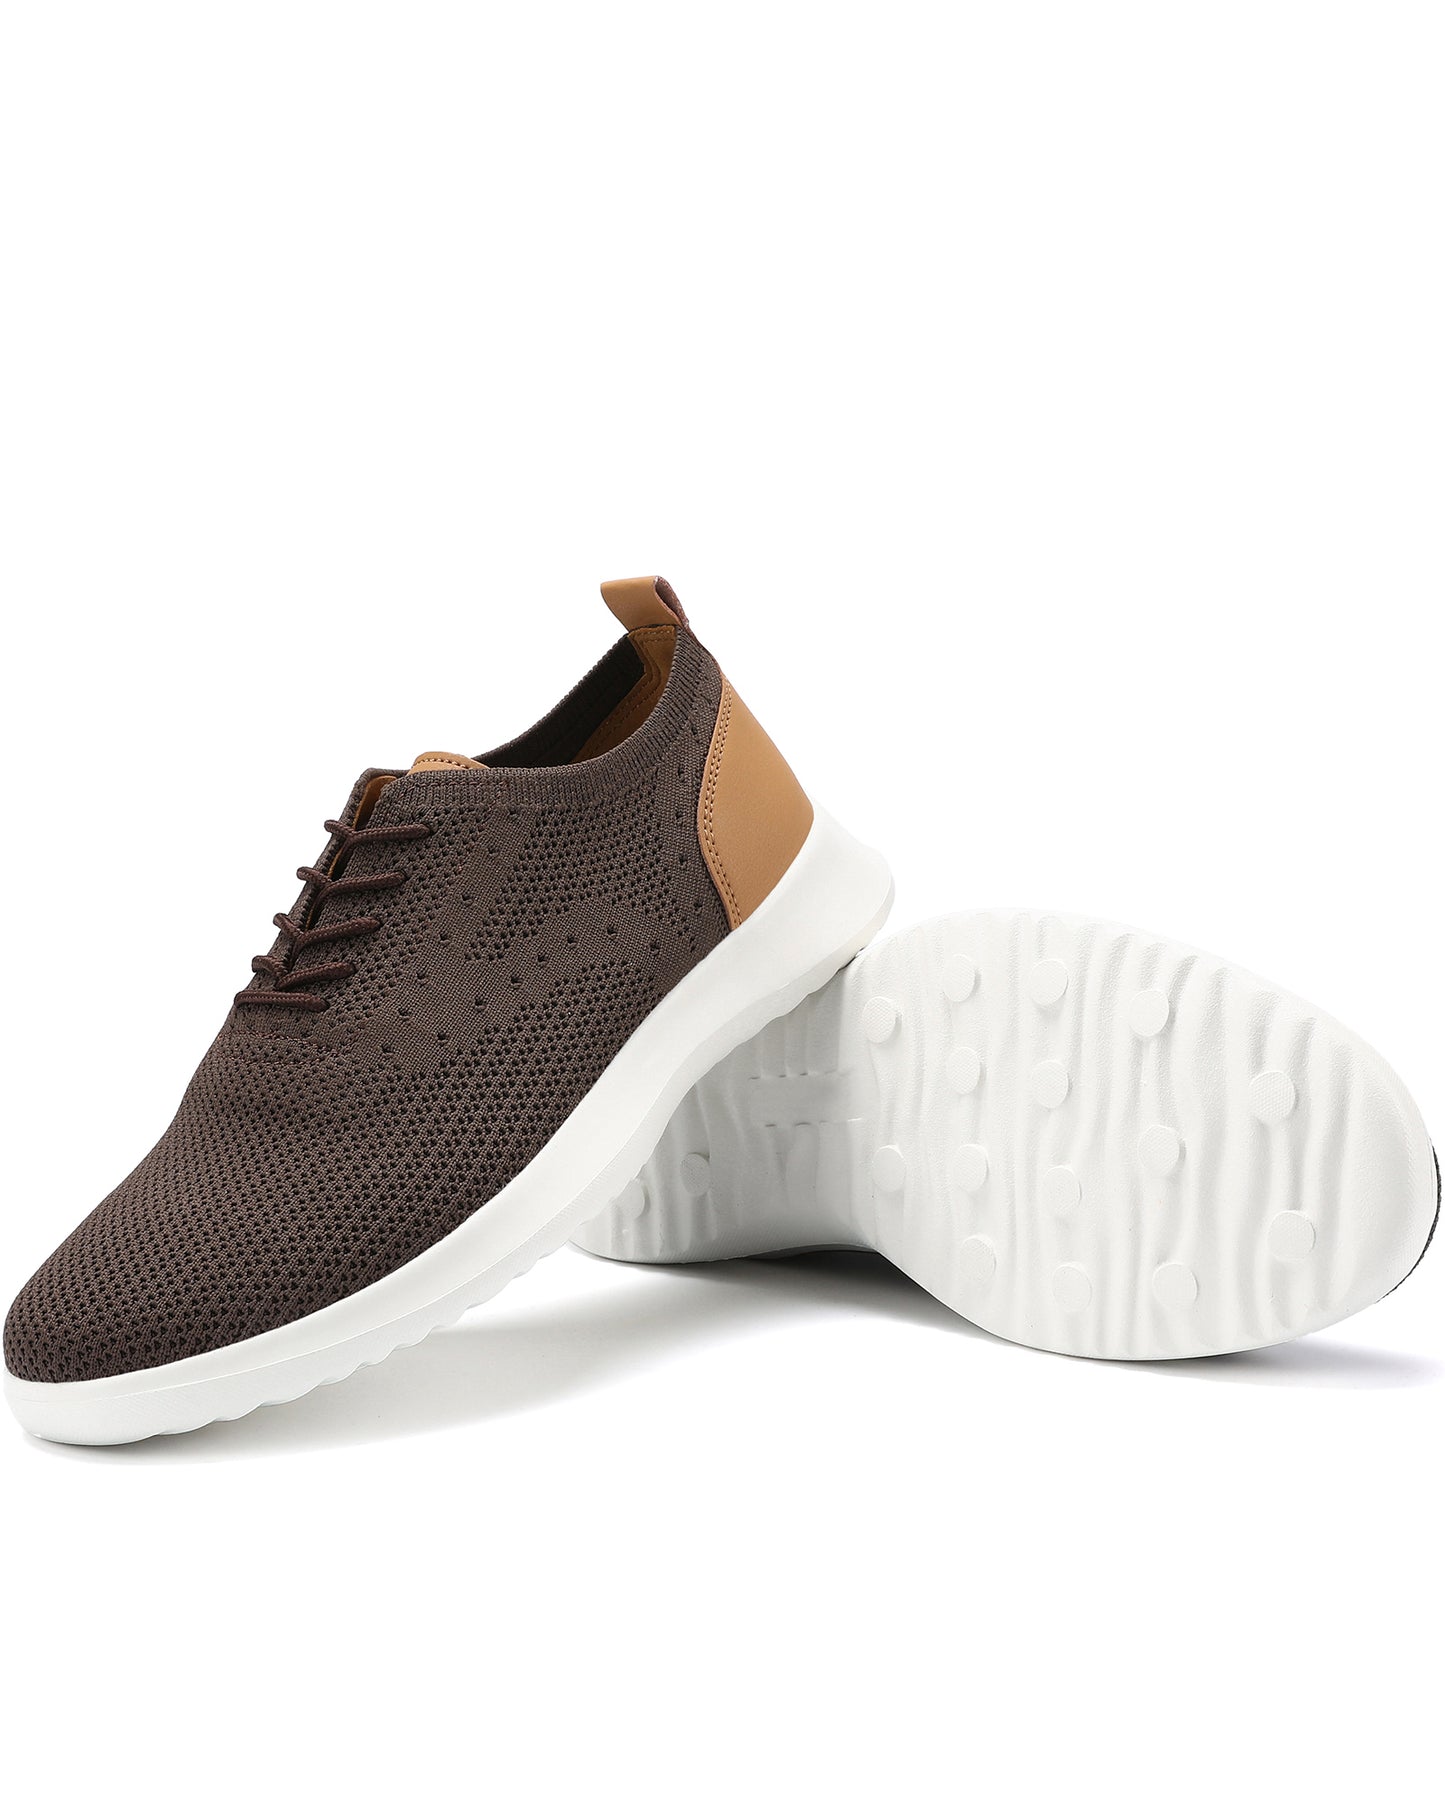 Men's Casual Dress Oxfords Shoes Knit Lightweight Breathable Fashion Sneaker